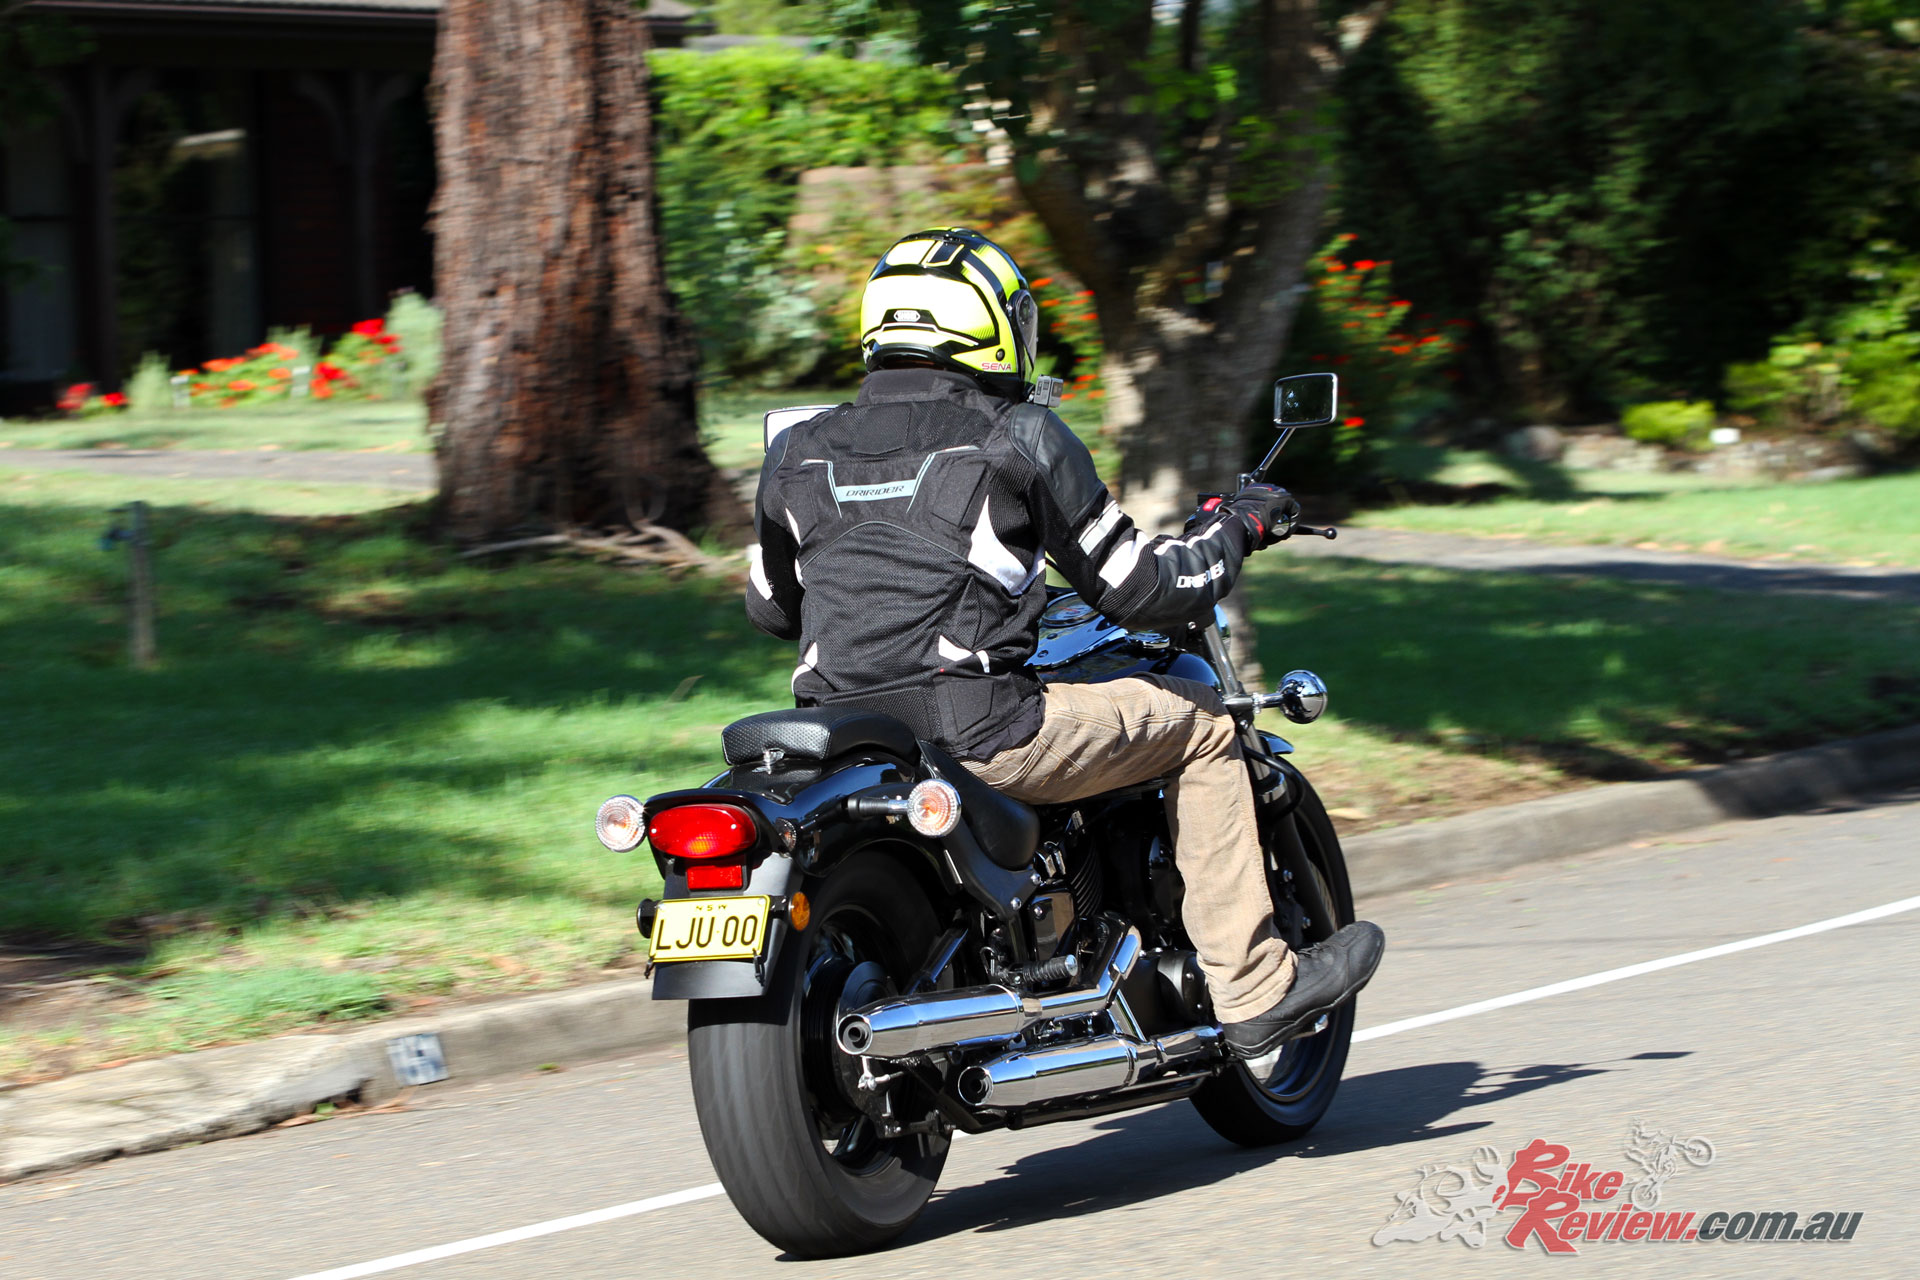 The V-Star 650 is as at home in crawling traffic as it is doing an urban commute or having a cruise through the twisties